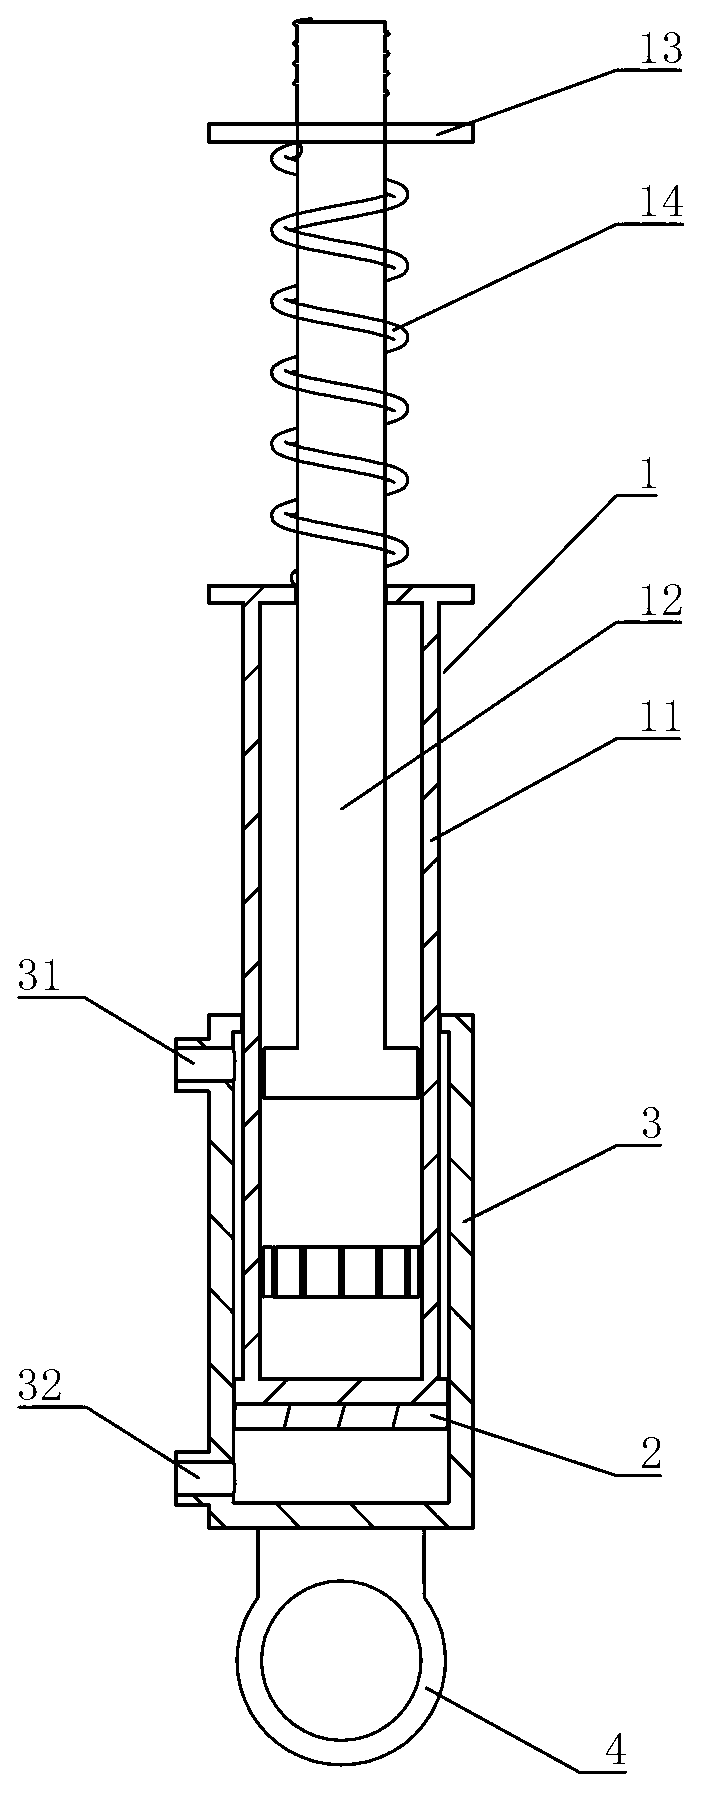 Independent suspension allowing for automatic car height adjustment and body stabilization system